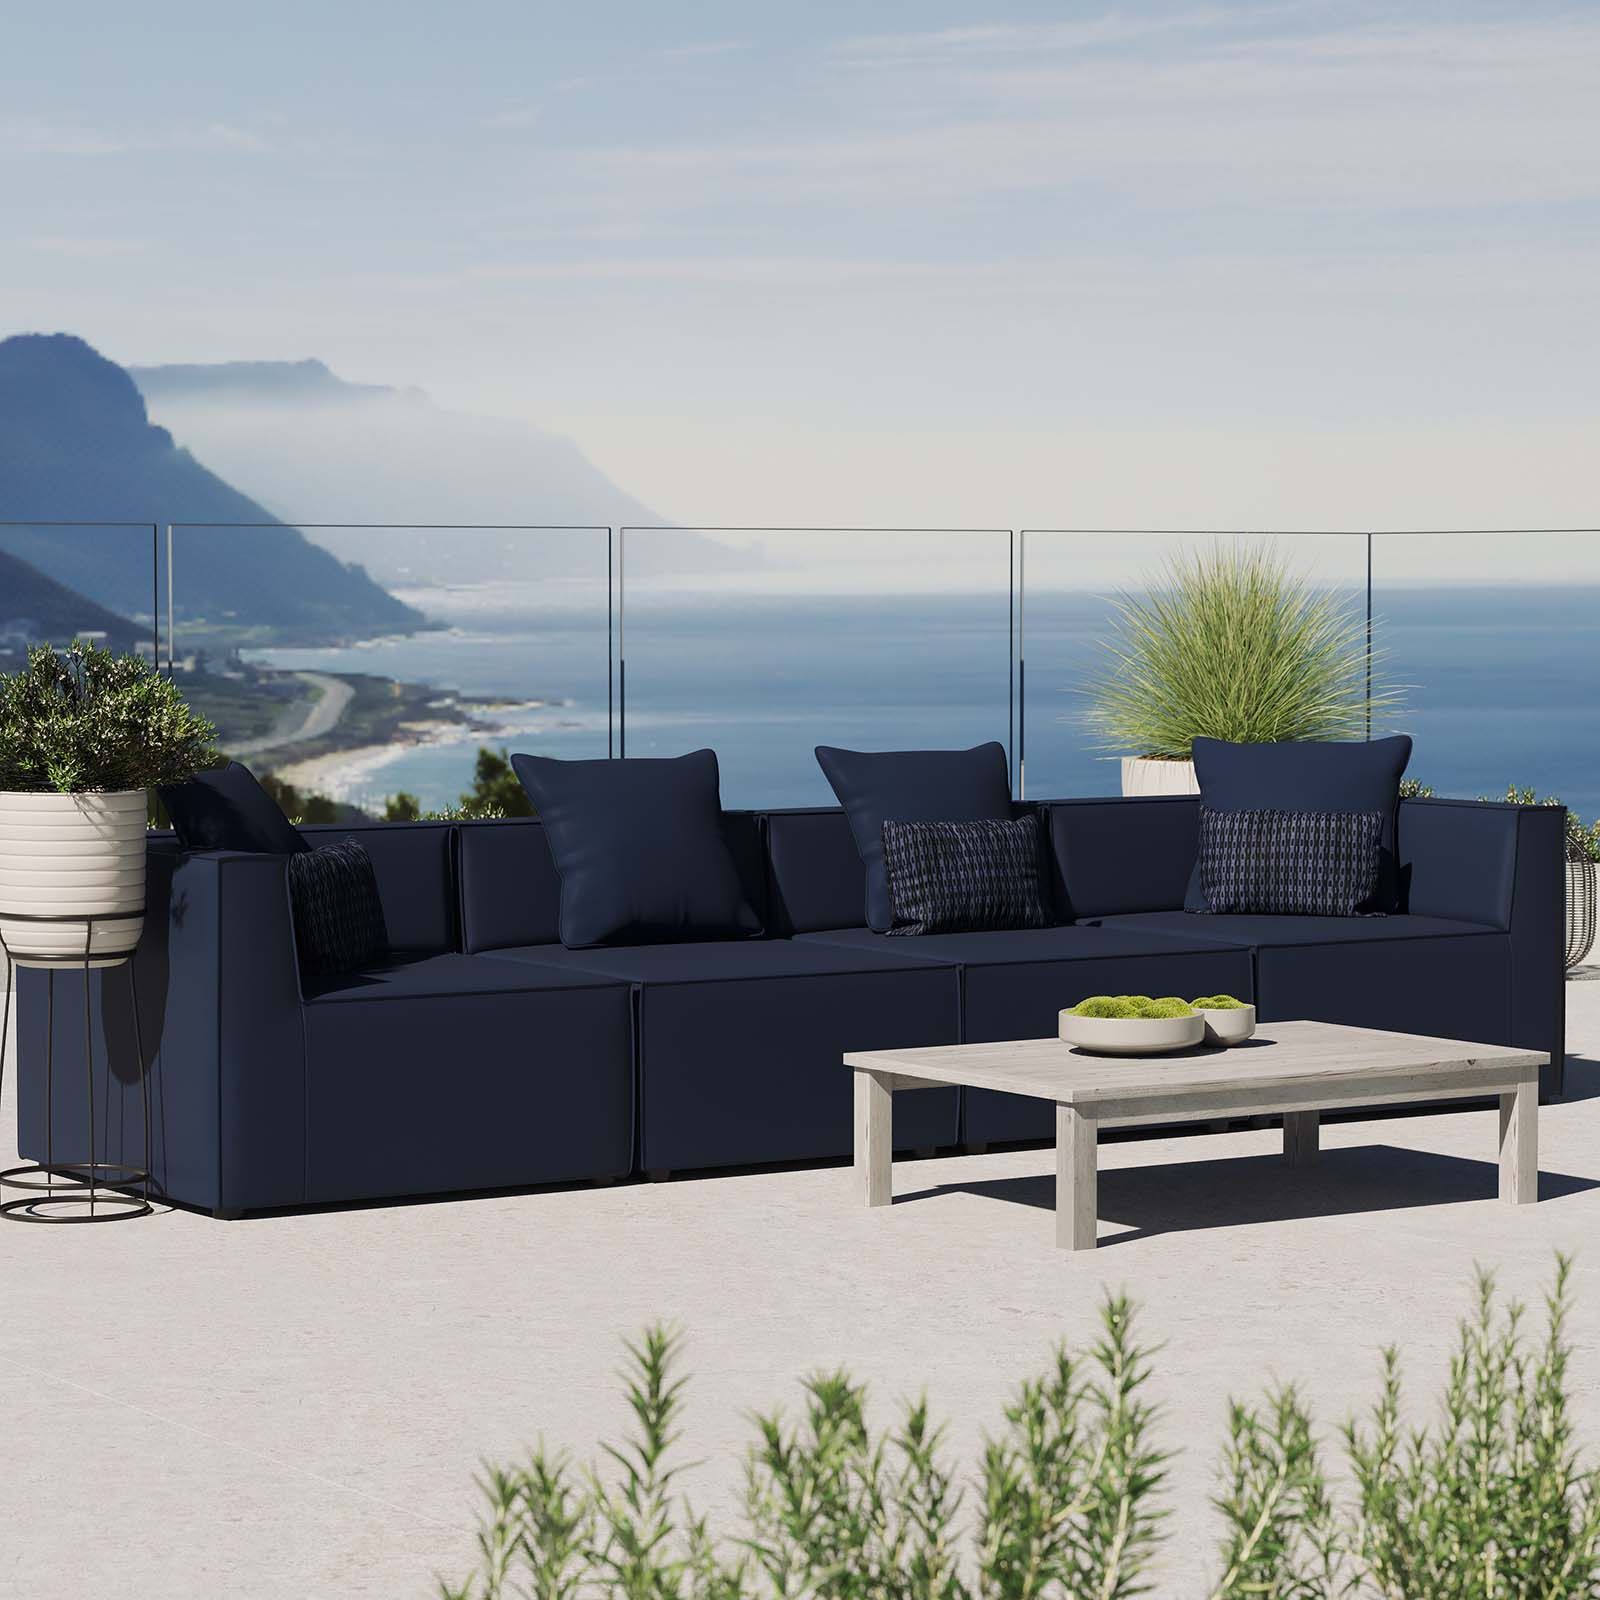 Navy Outdoor Seating Sectional Patio Sets Pertaining To Most Up To Date Saybrook Outdoor Patio Upholstered 4 Piece Sectional Sofa In Navy (View 1 of 15)